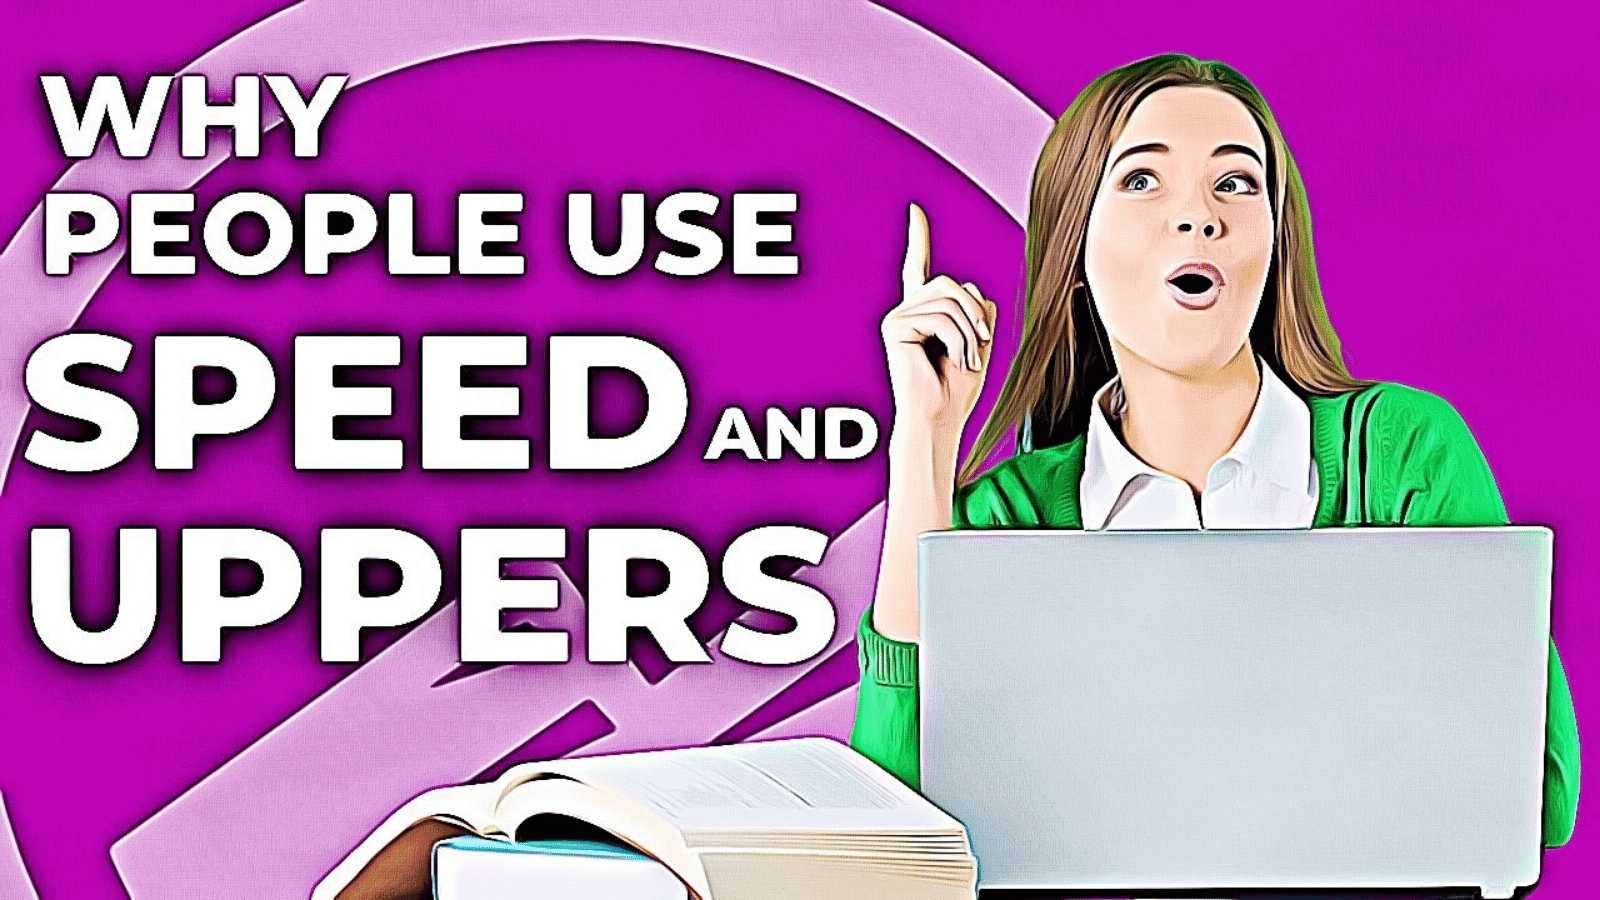 Why people use speed and uppers_Meth video thumbnail